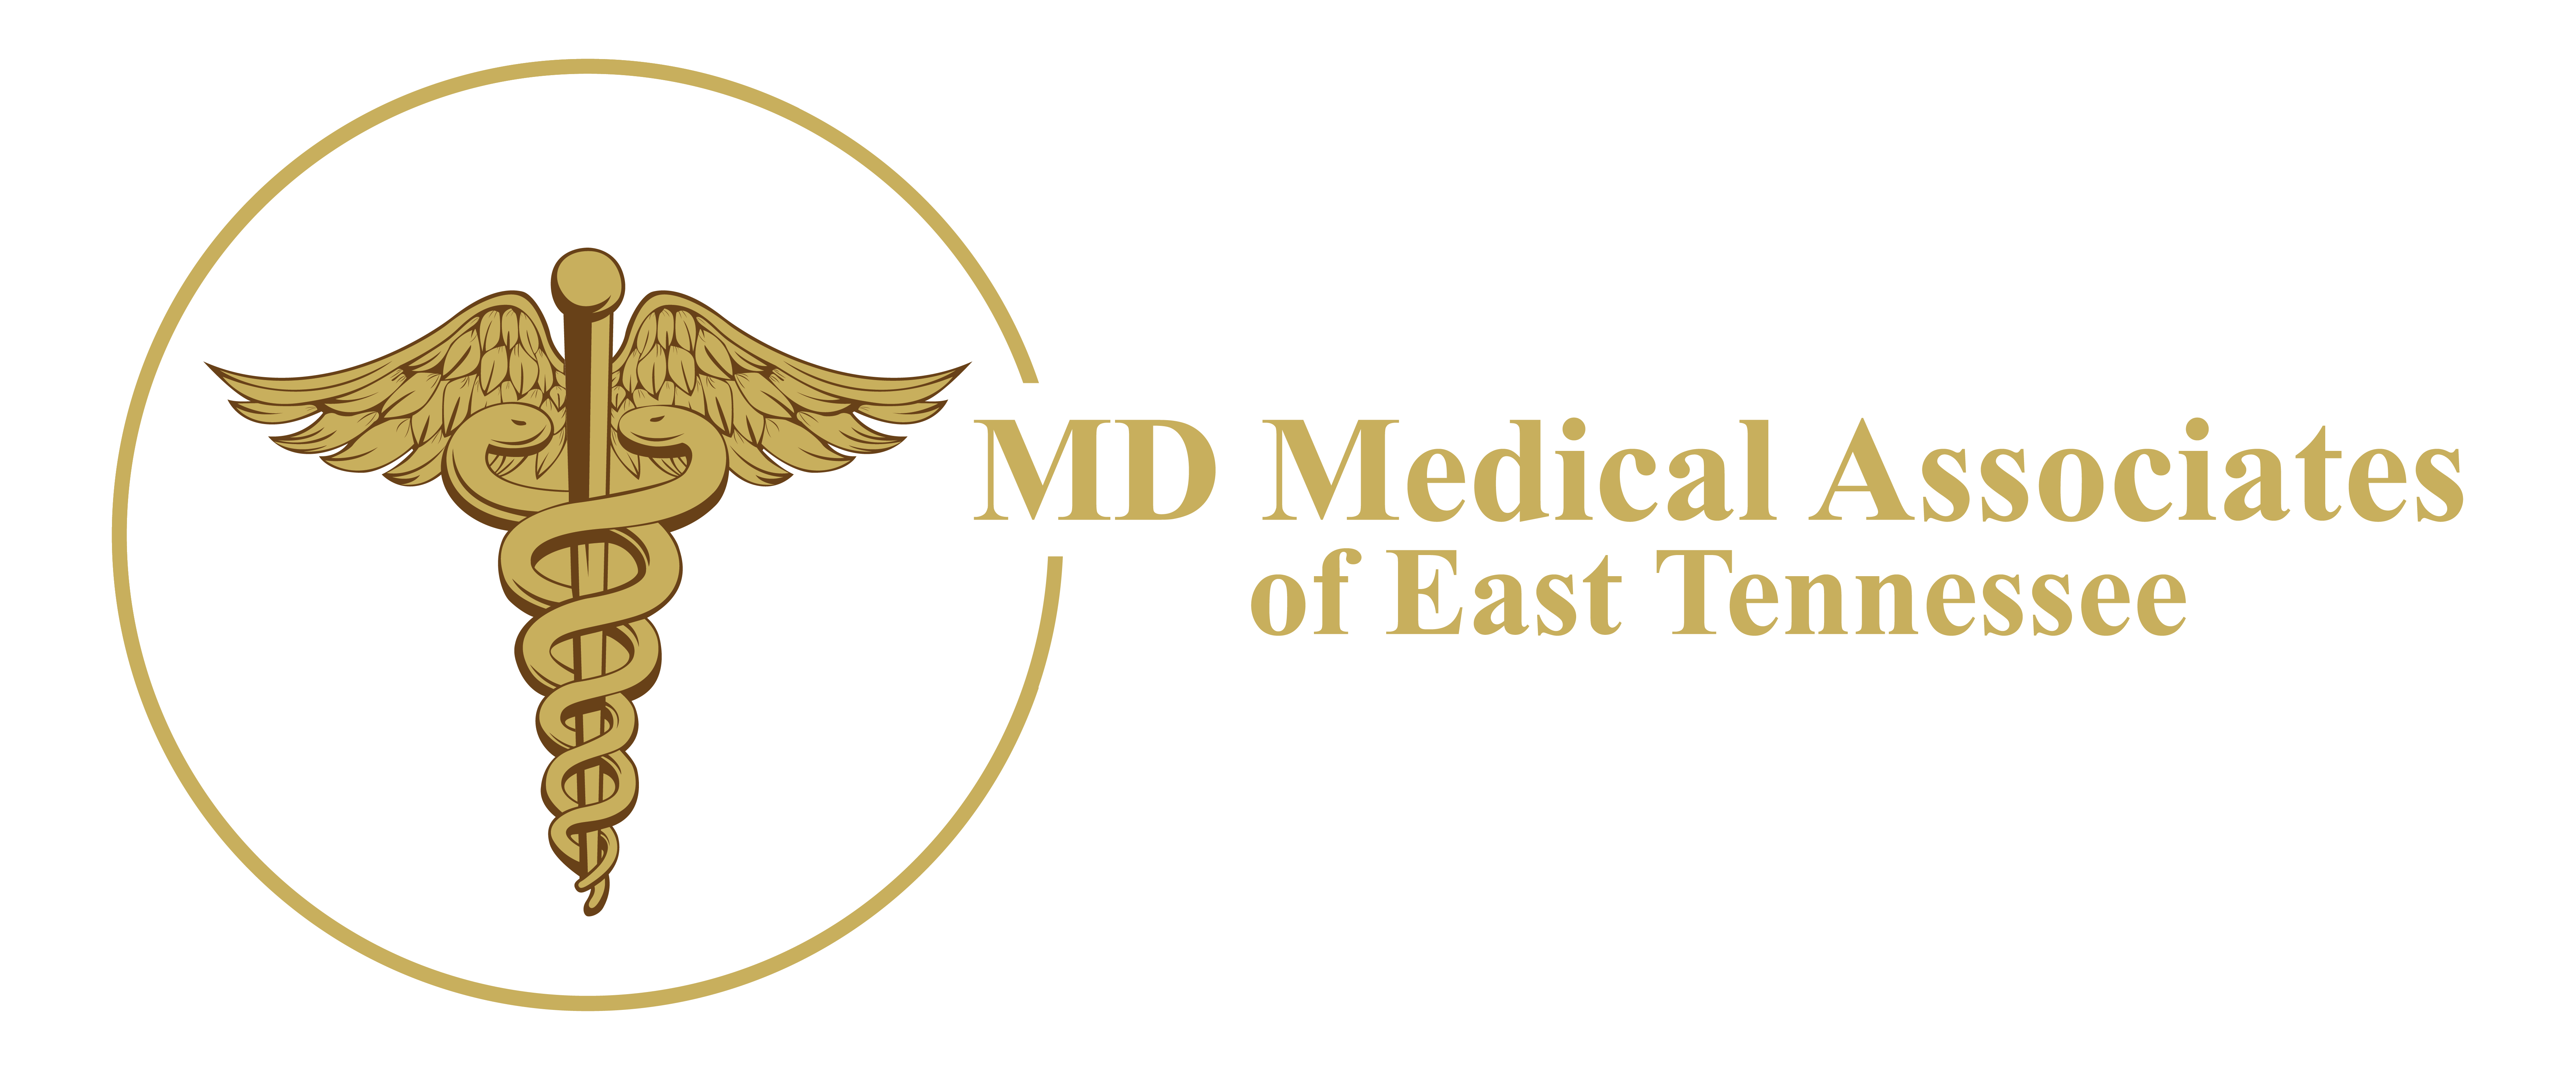 MD Medical Associates of East Tennessee